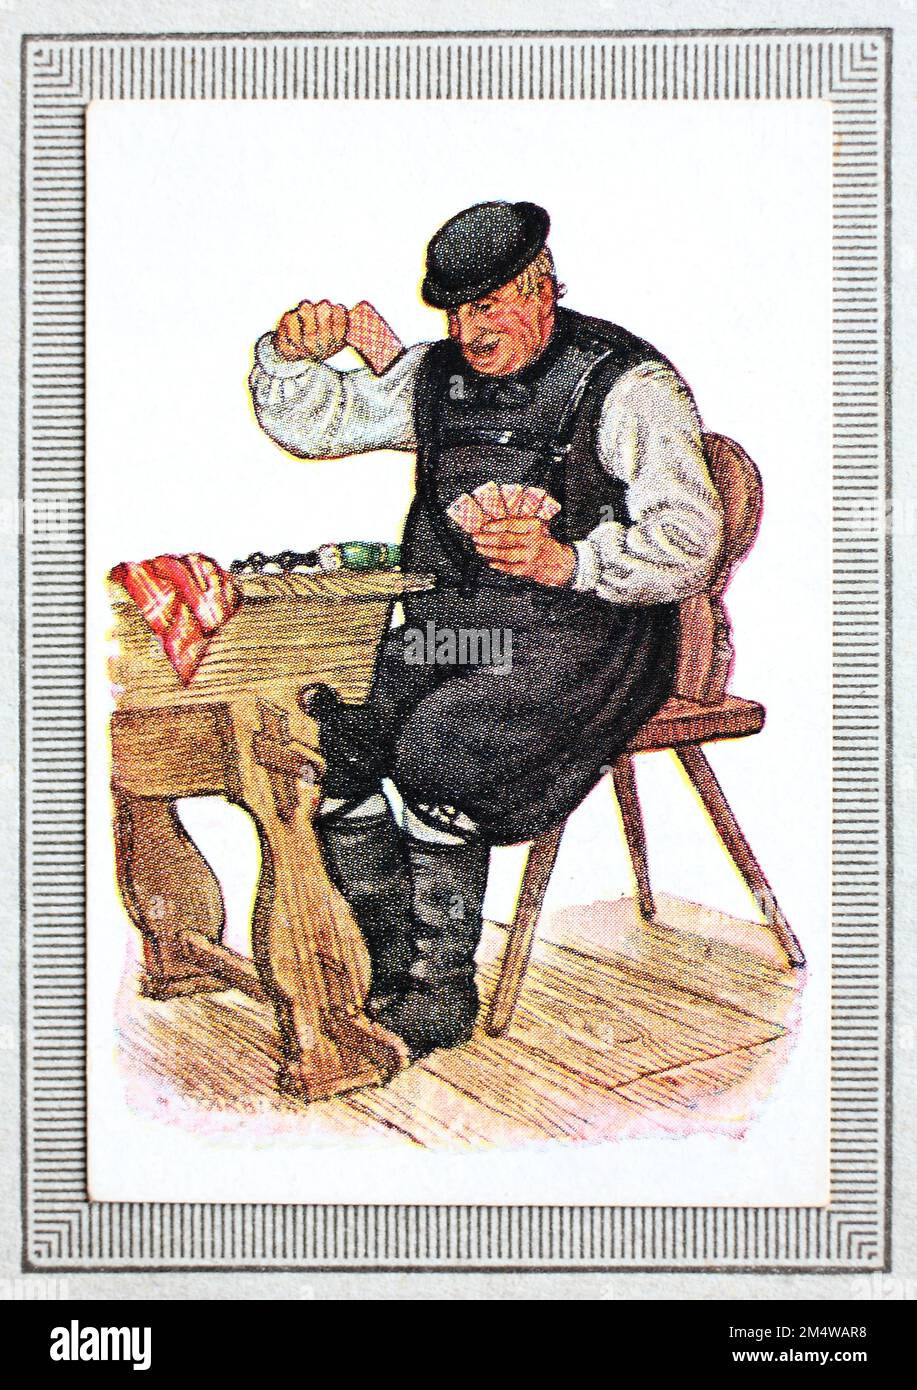 Altenburg playing cards hi-res stock photography and images - Alamy